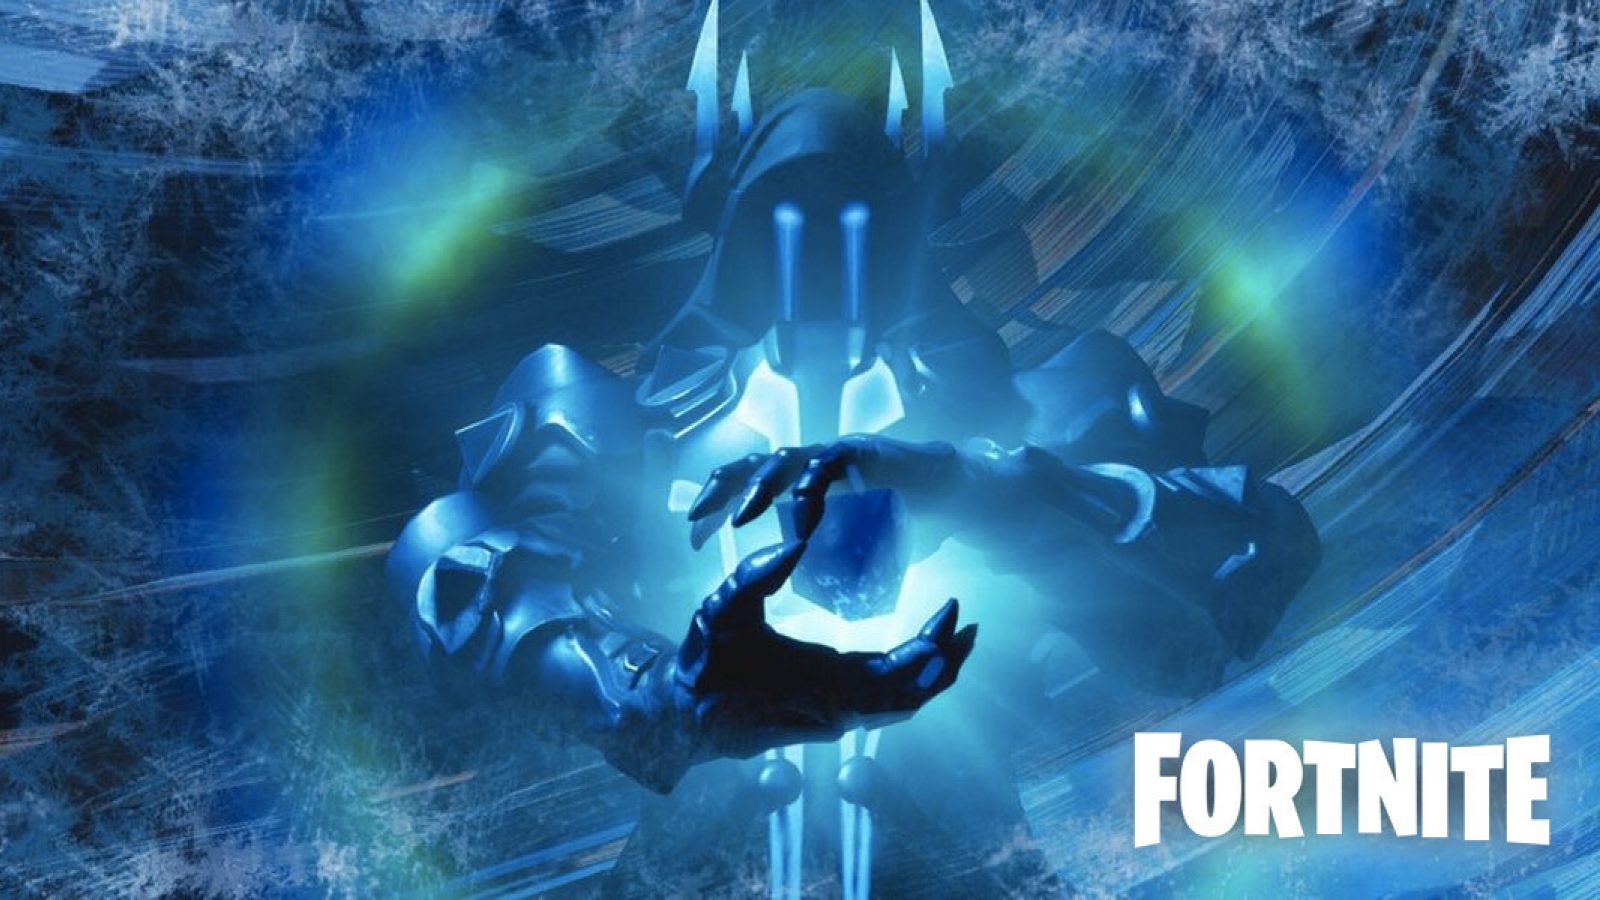 Ice Storm Ltm Added To Fortnite With Sphere Live Event